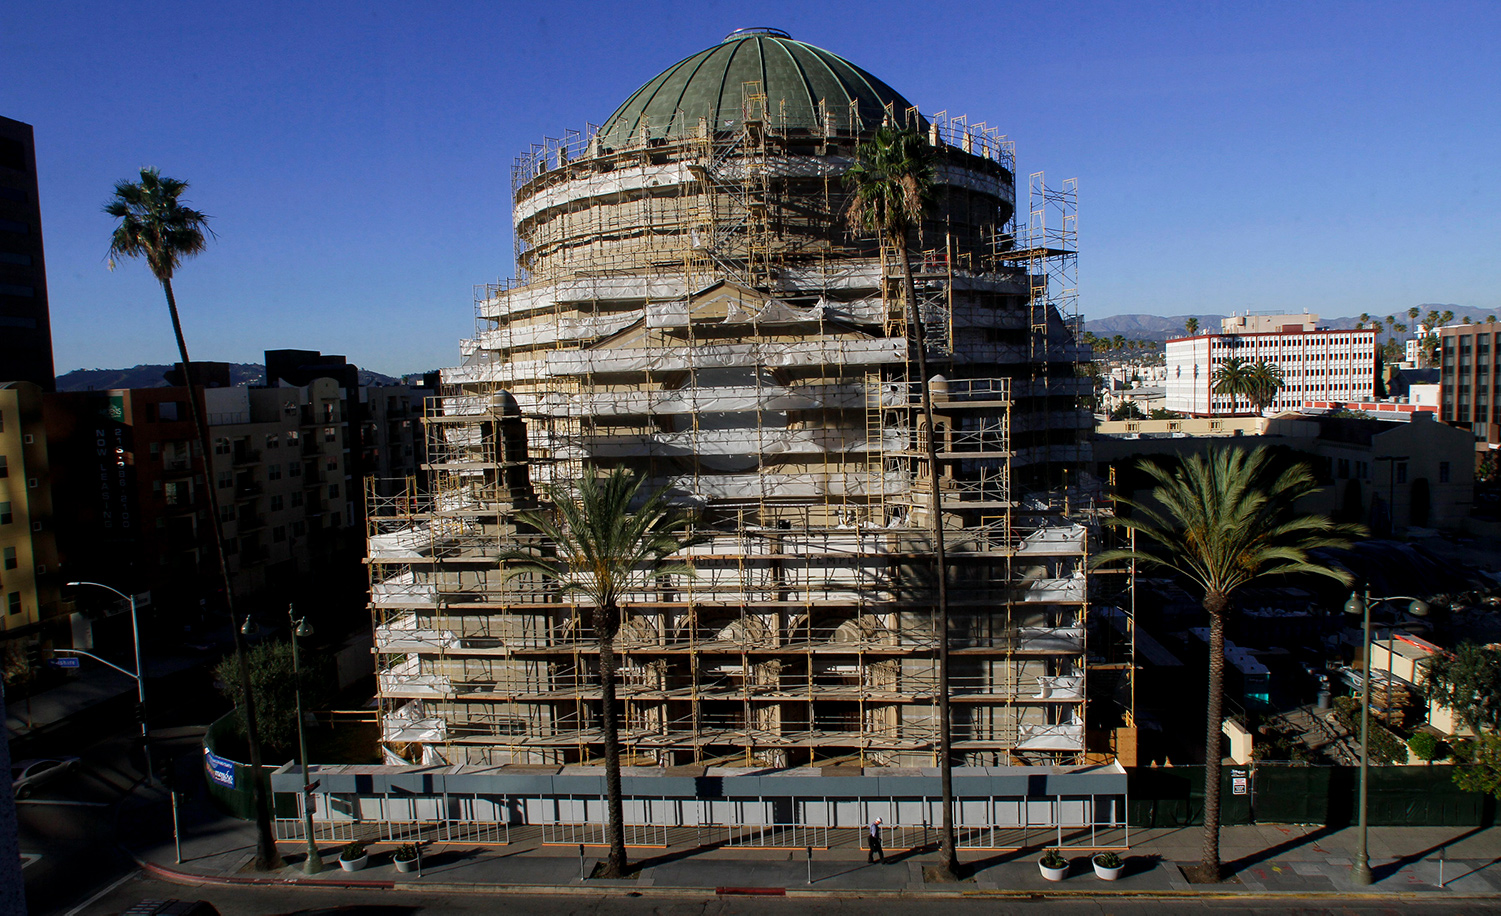 Scaffolding covering the Wilshire Boulevard Temple in Los Angeles on March 6, 2012. Anne Cusack/Los Angeles Times via Getty Images.
